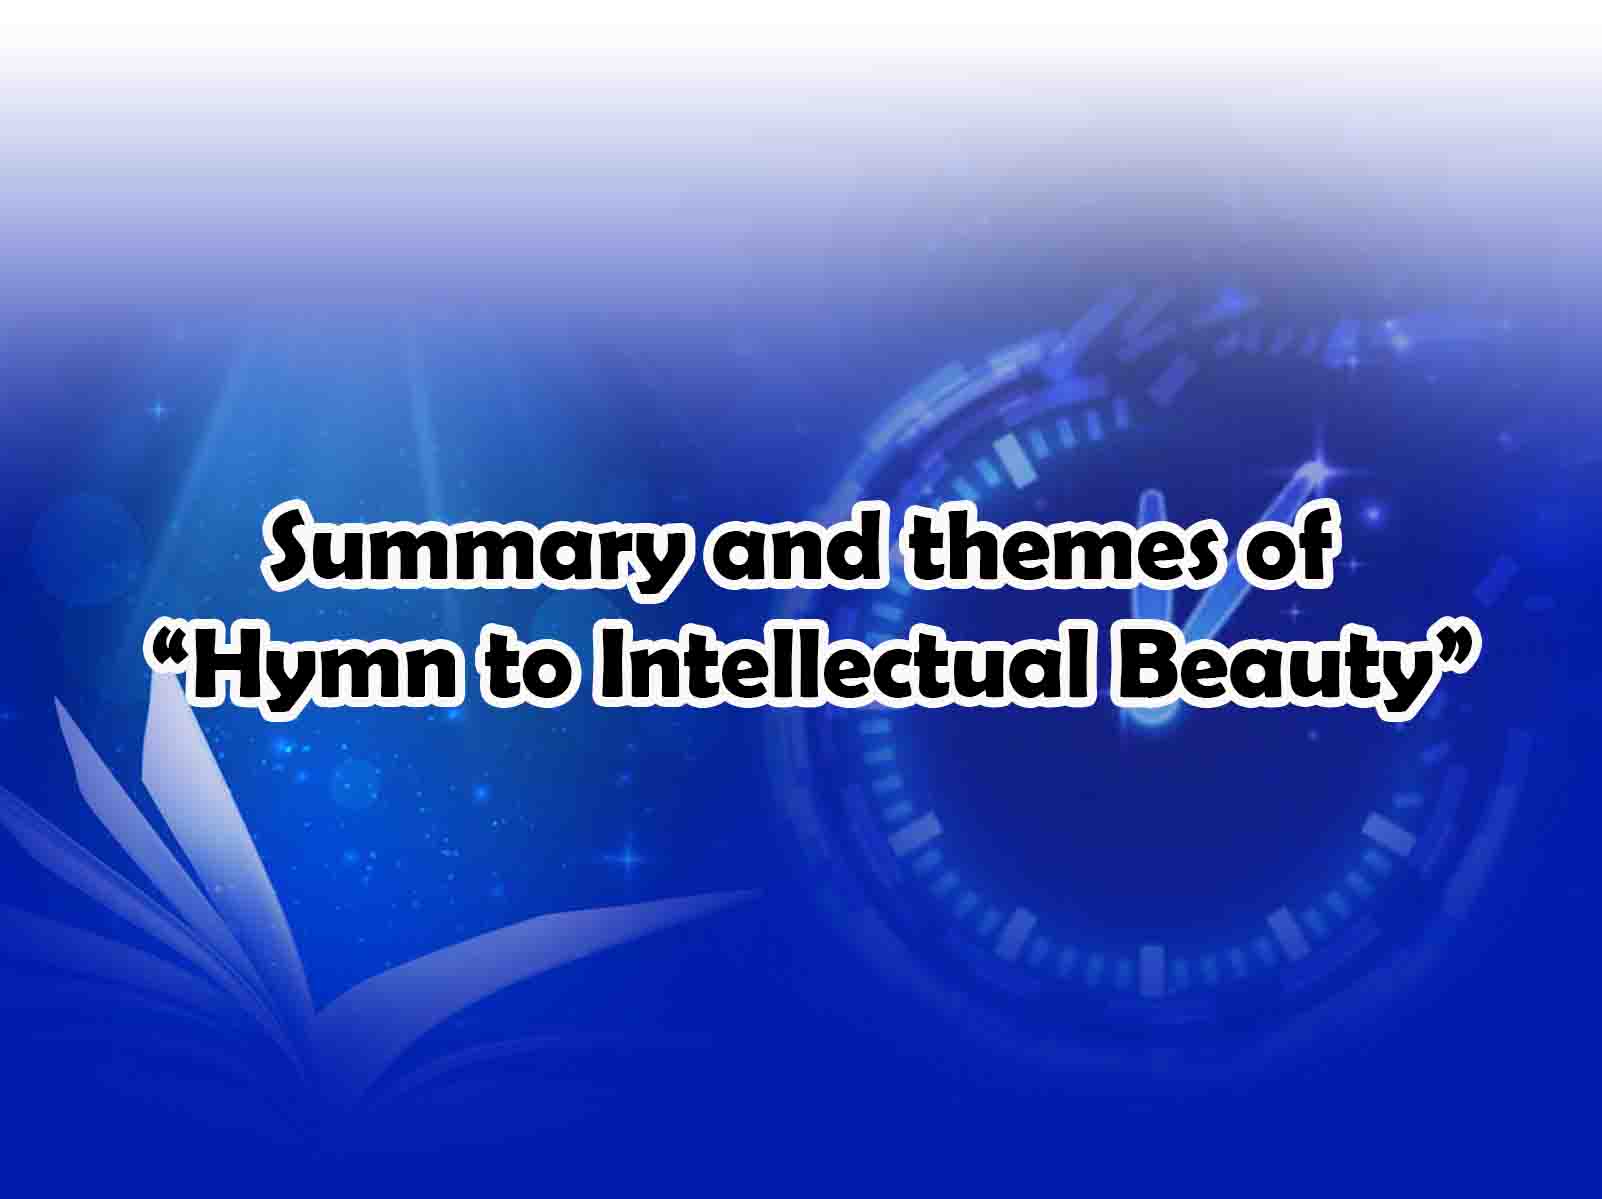 Summary and themes of “Hymn to Intellectual Beauty”